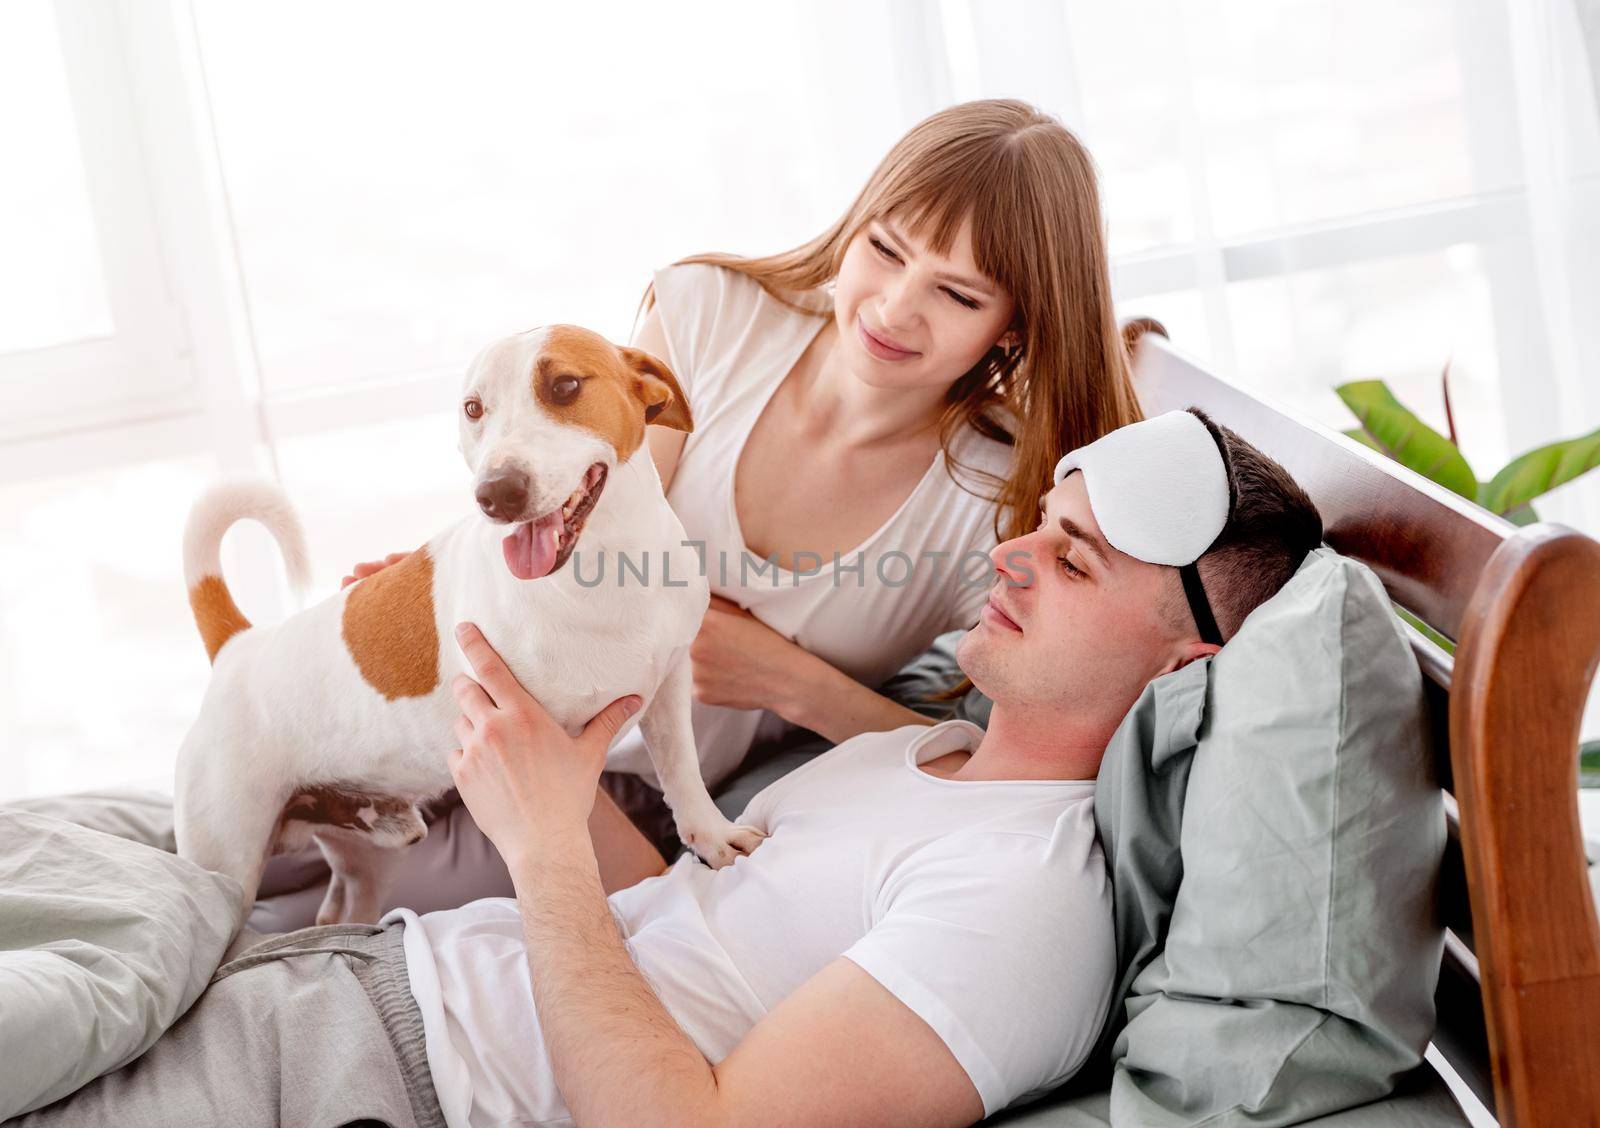 Couple in the bed with dog by tan4ikk1